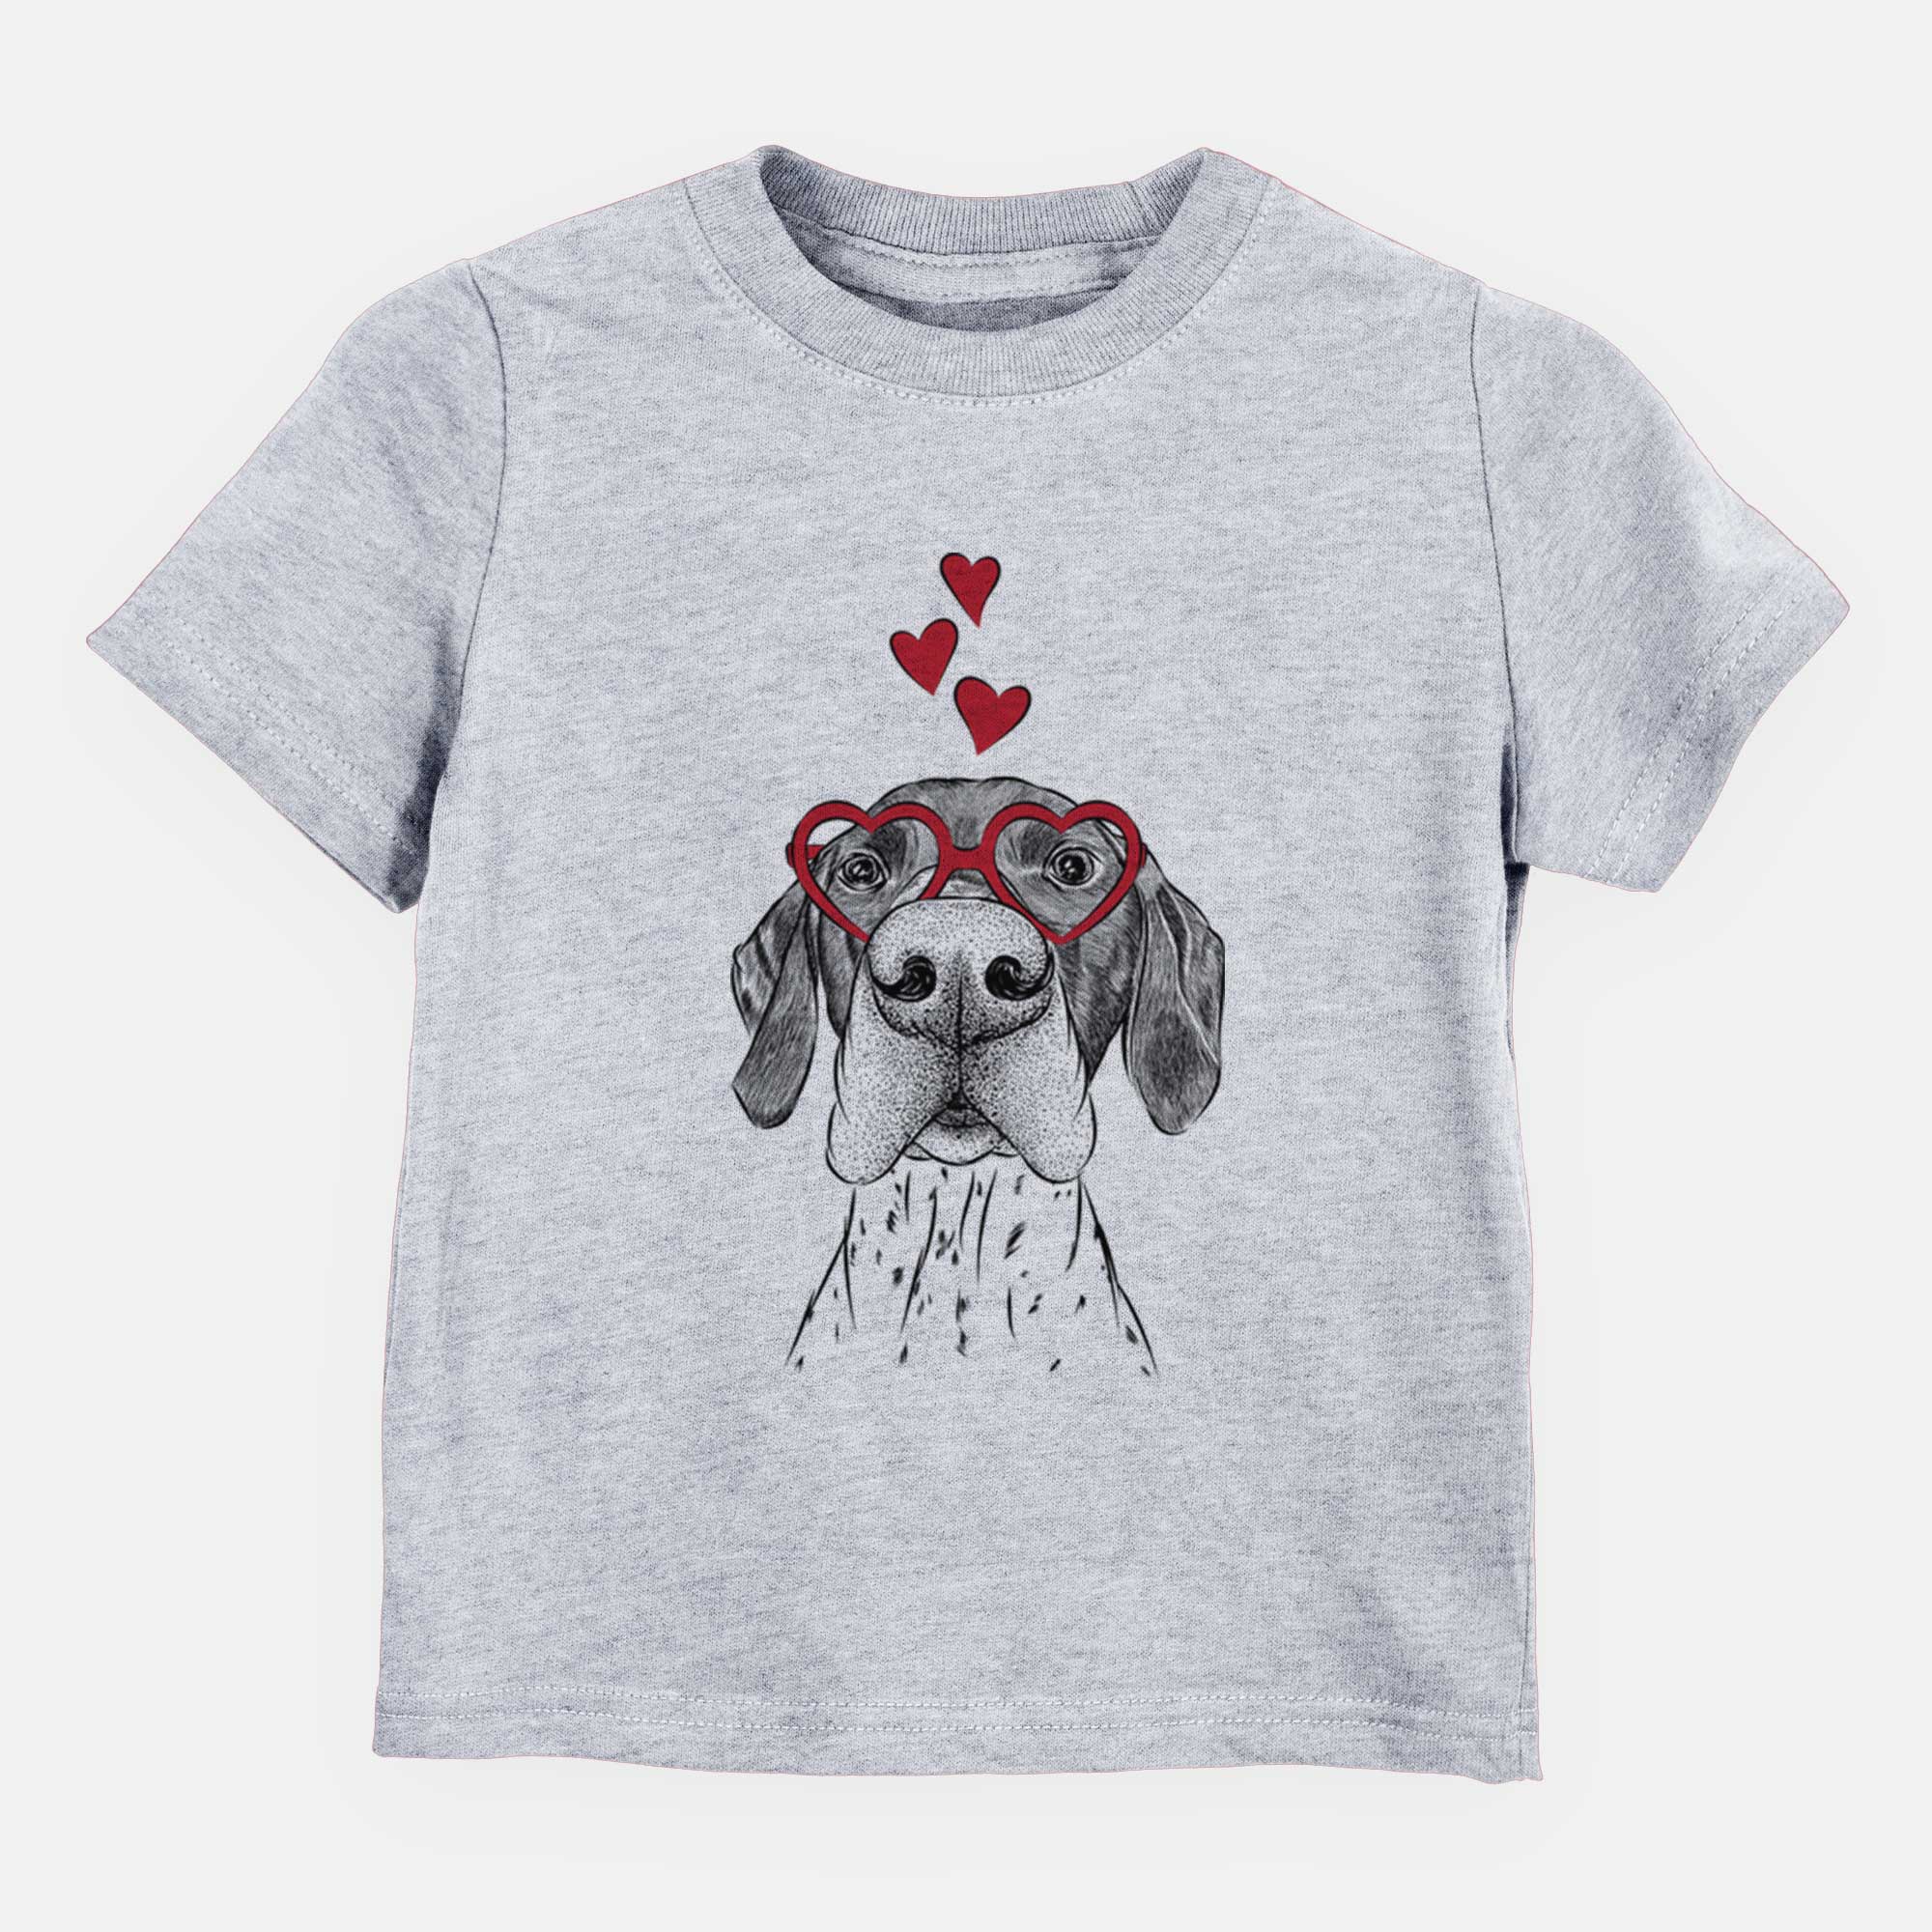 Valentine Booze the German Shorthaired Pointer - Kids/Youth/Toddler Shirt